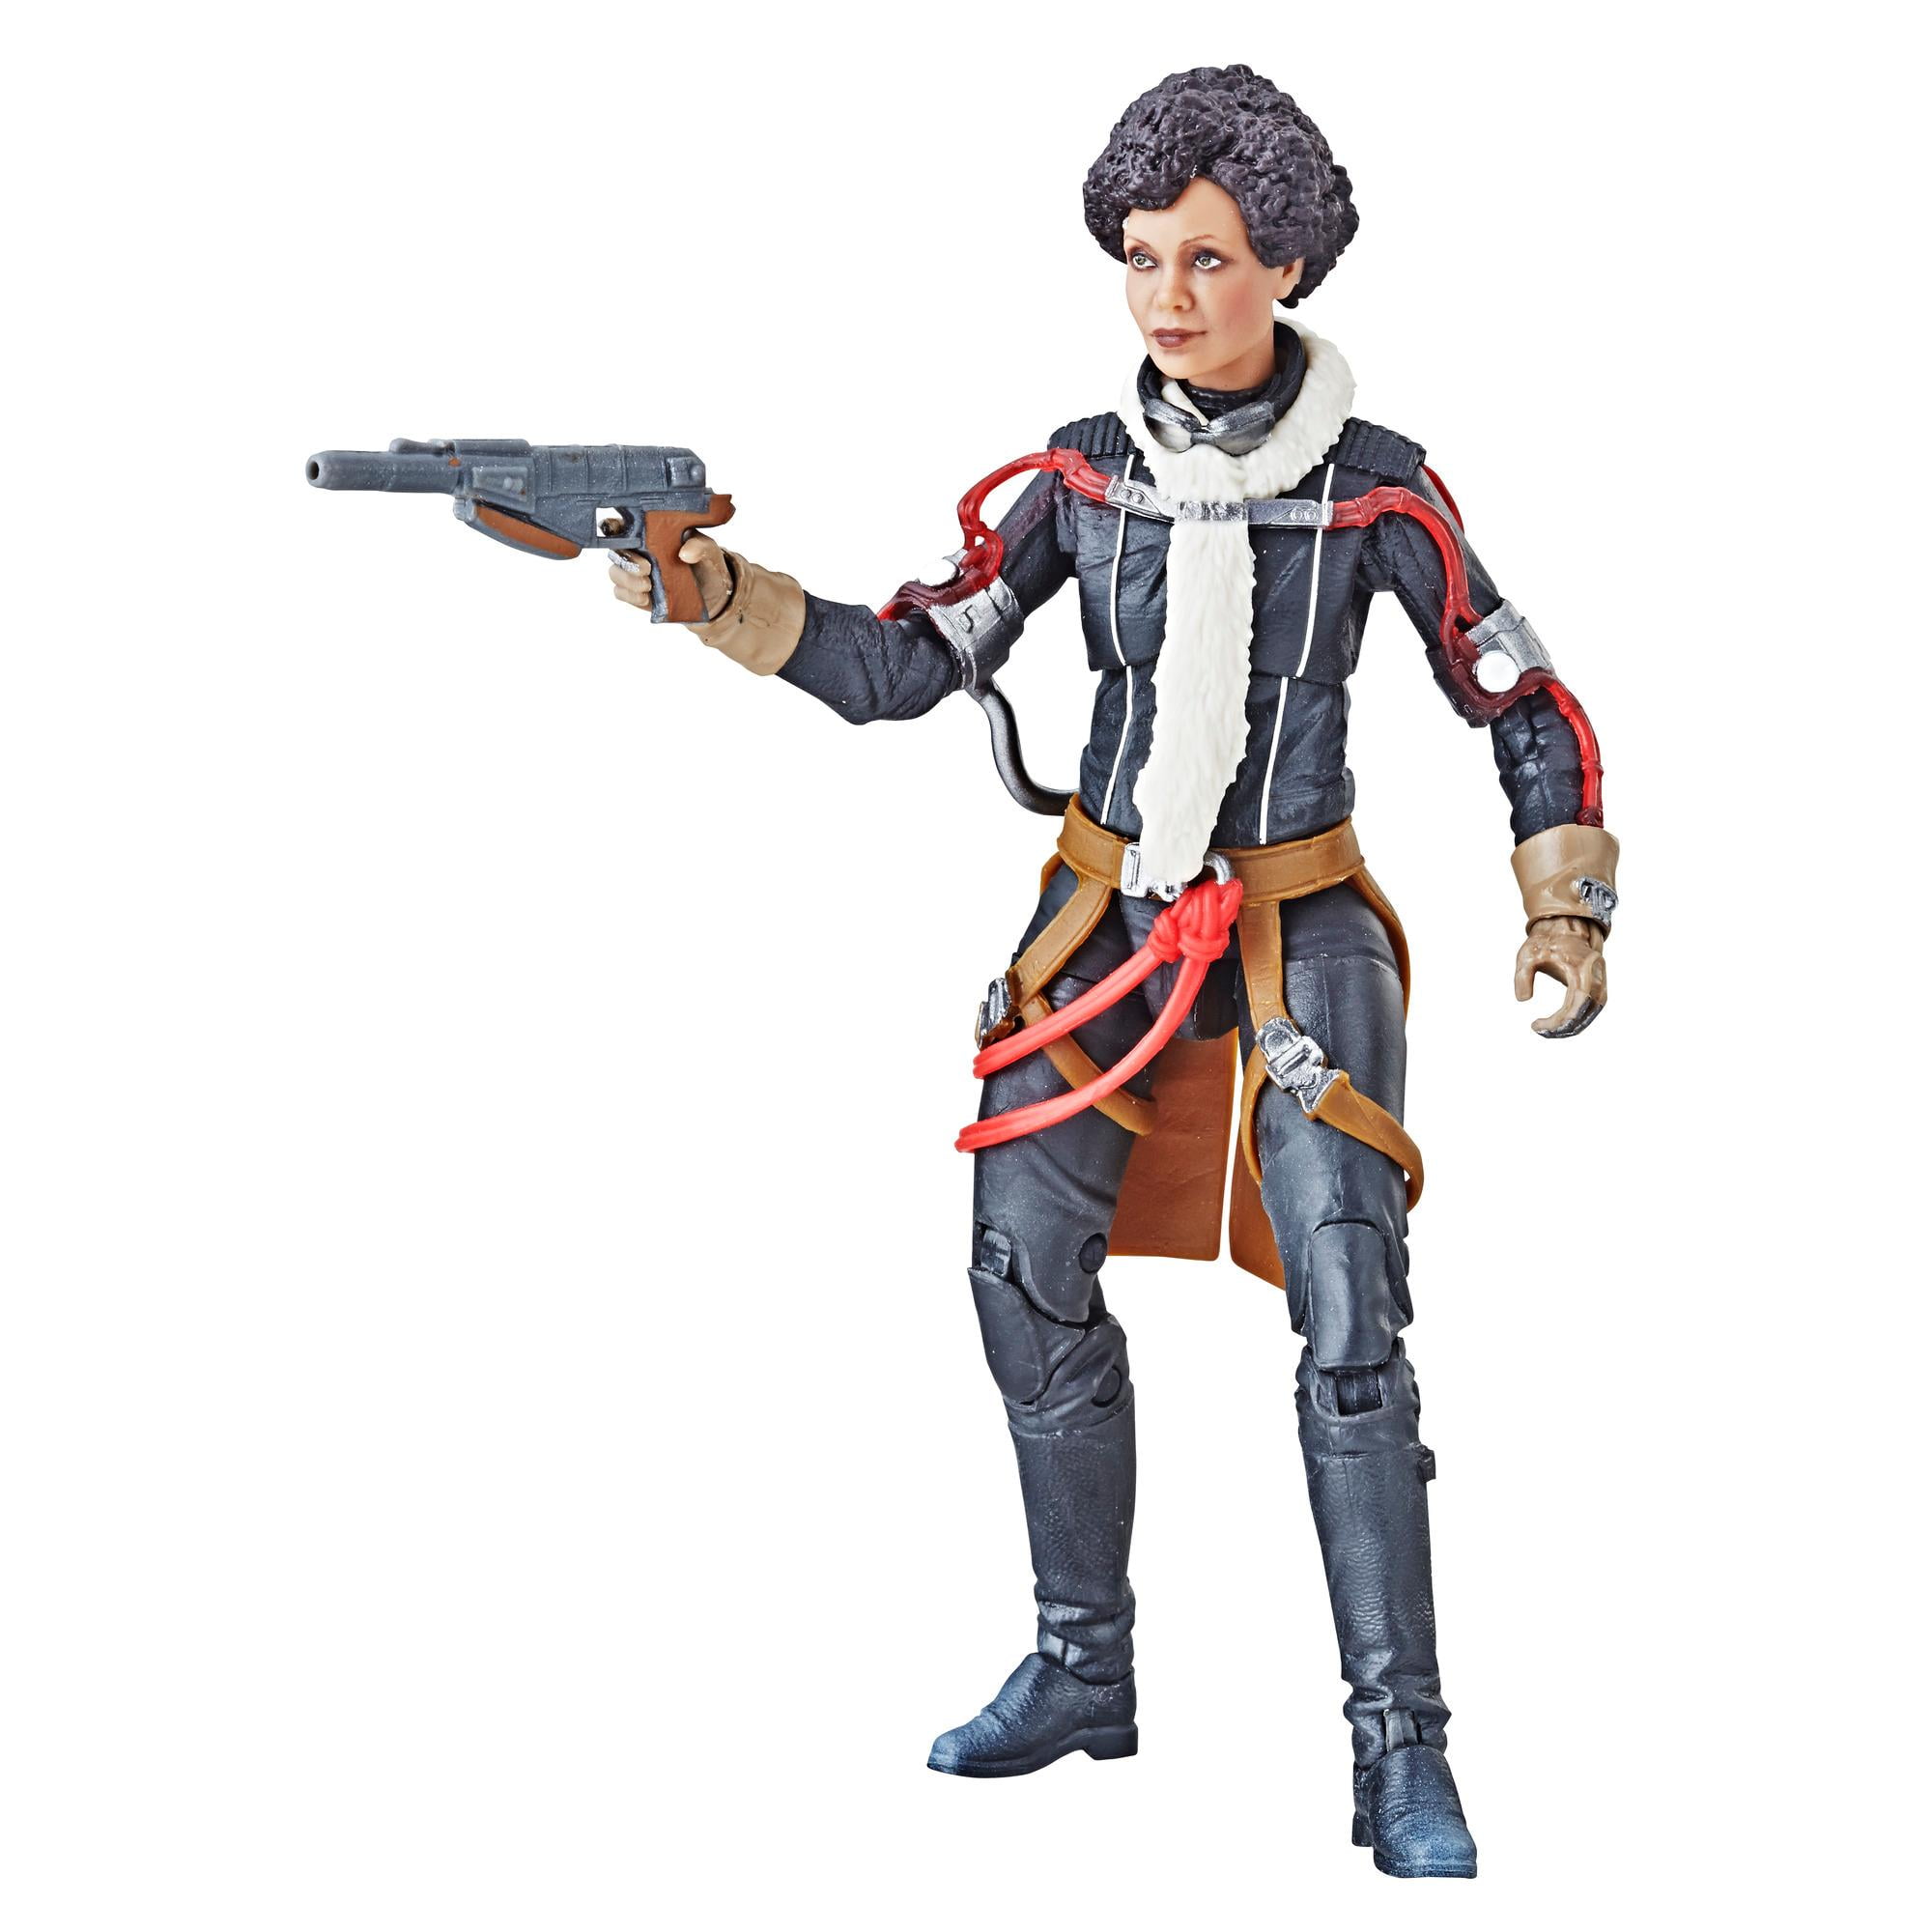 Corellia 6-inch Action Figure for sale online Hasbro Star Wars The Black Series Qi’Ra 